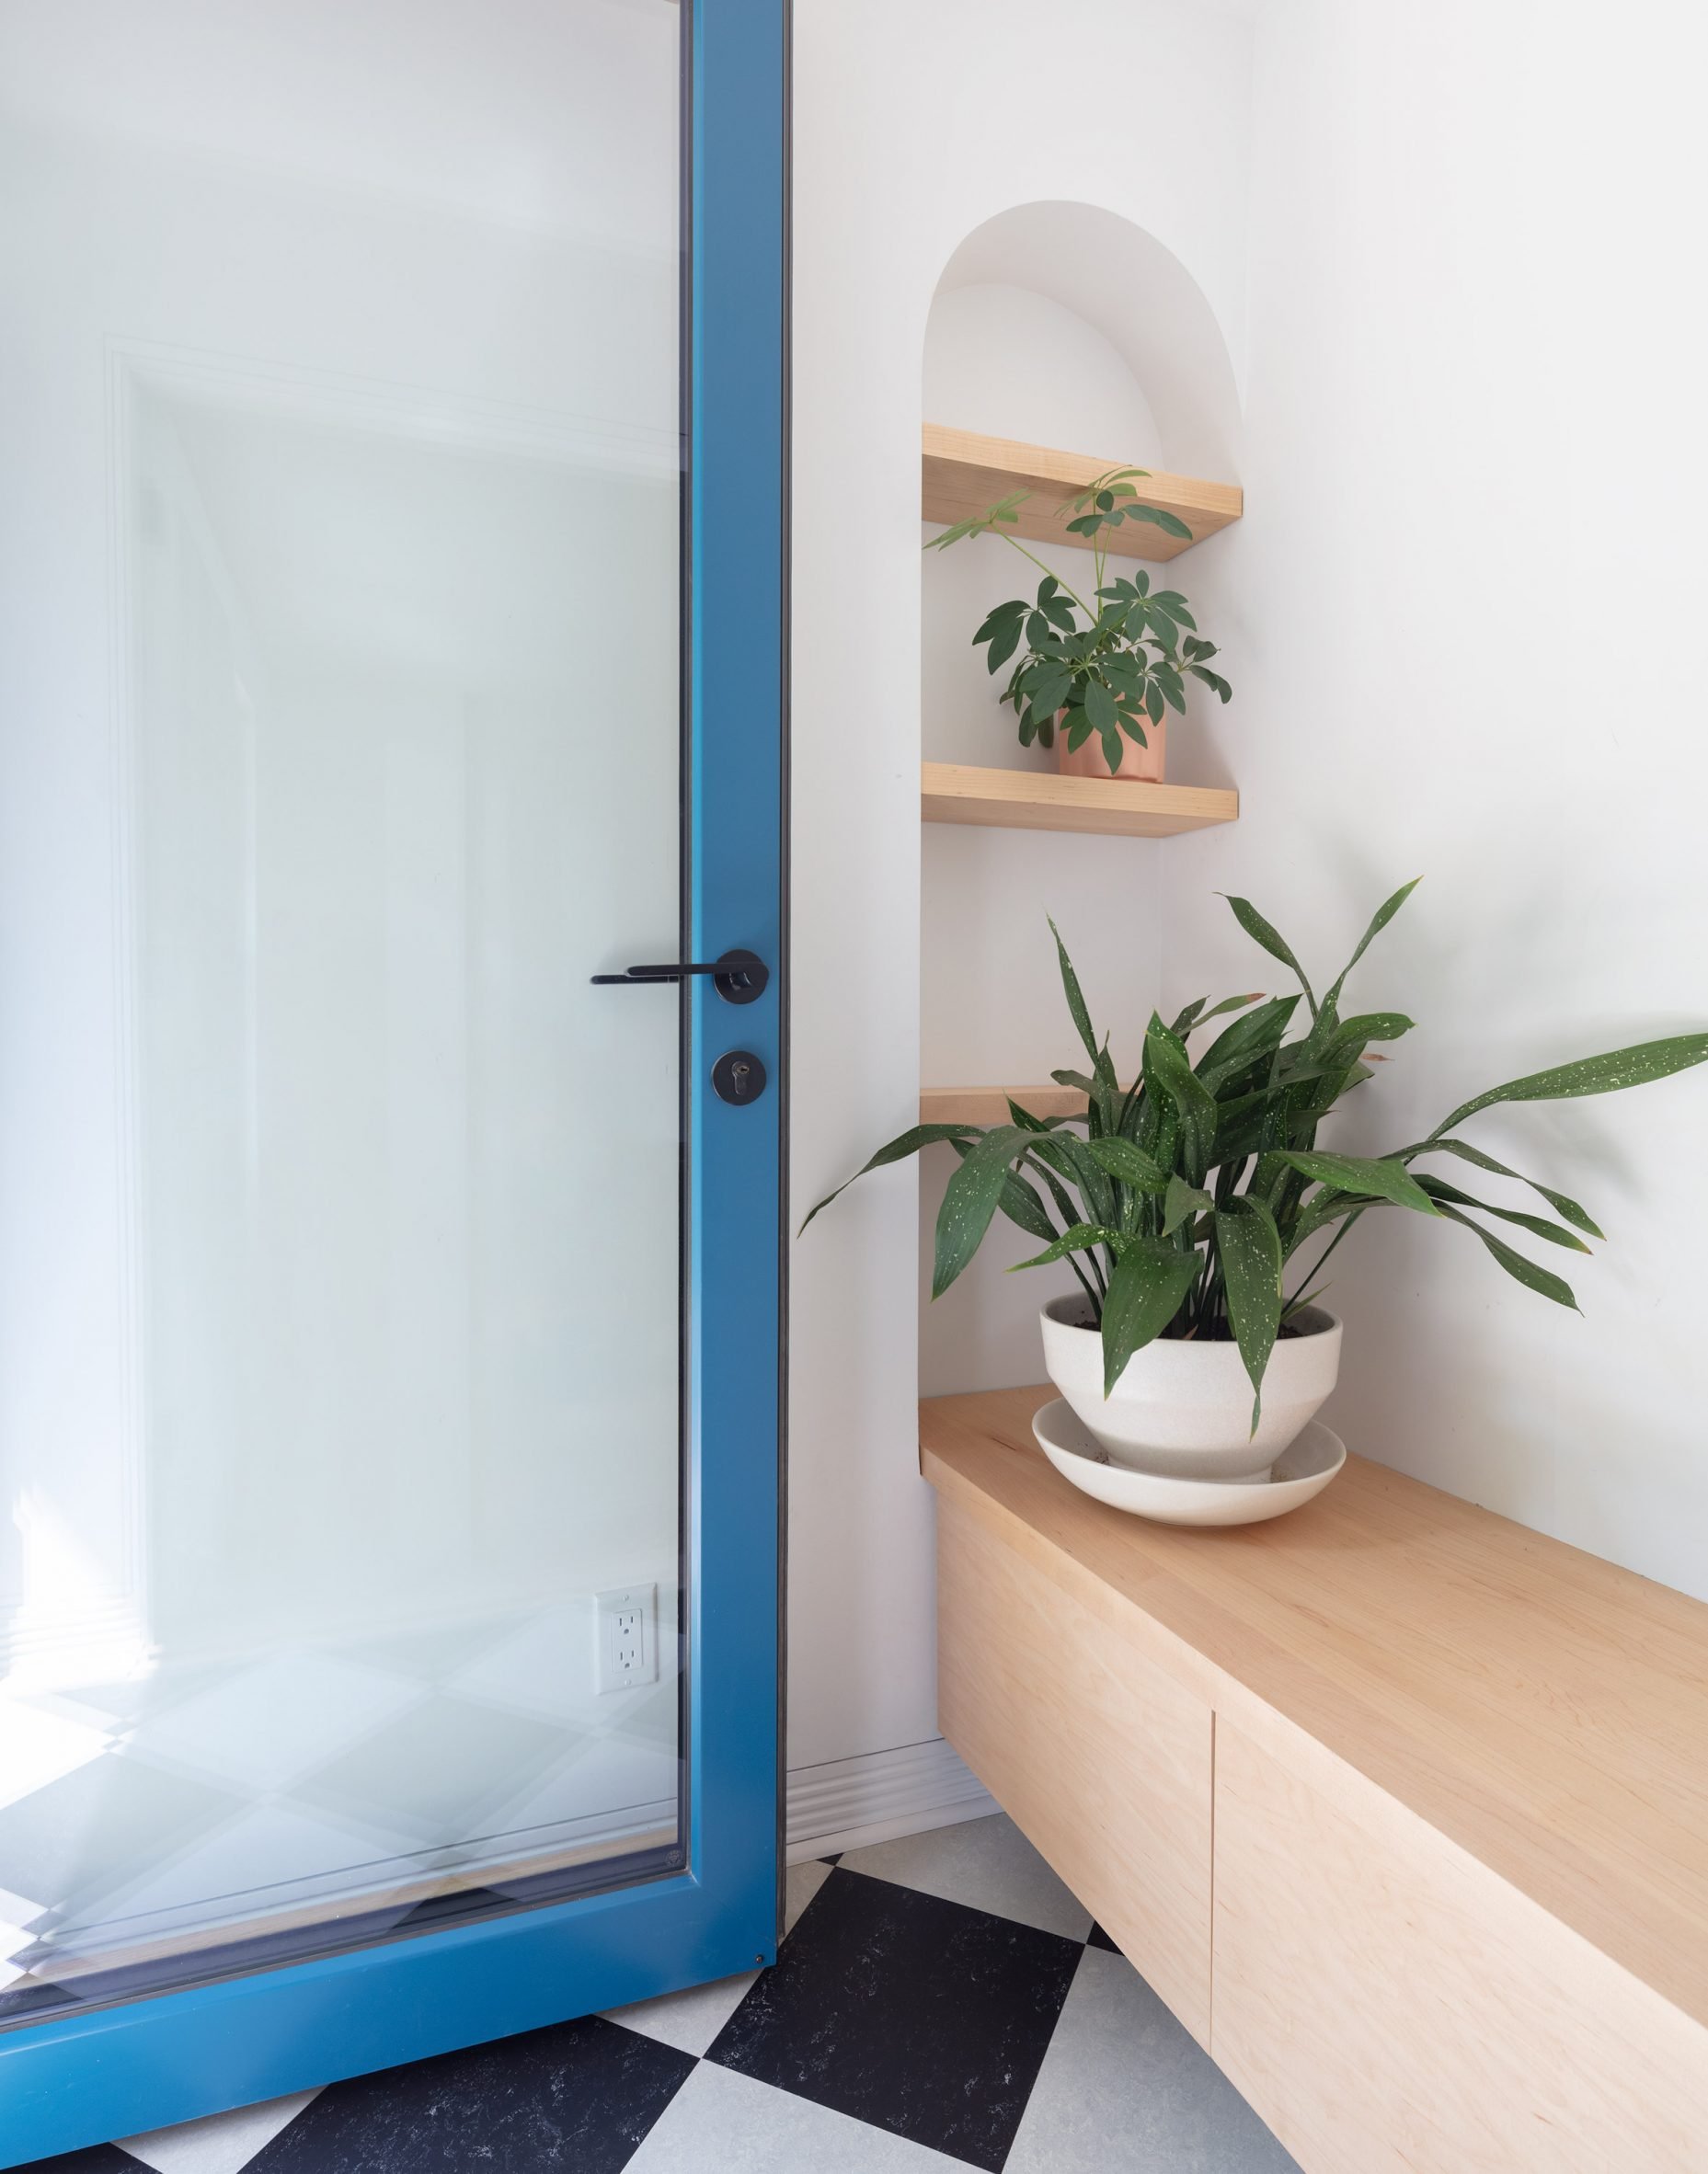 Glass door with bright blue frame open into an interior